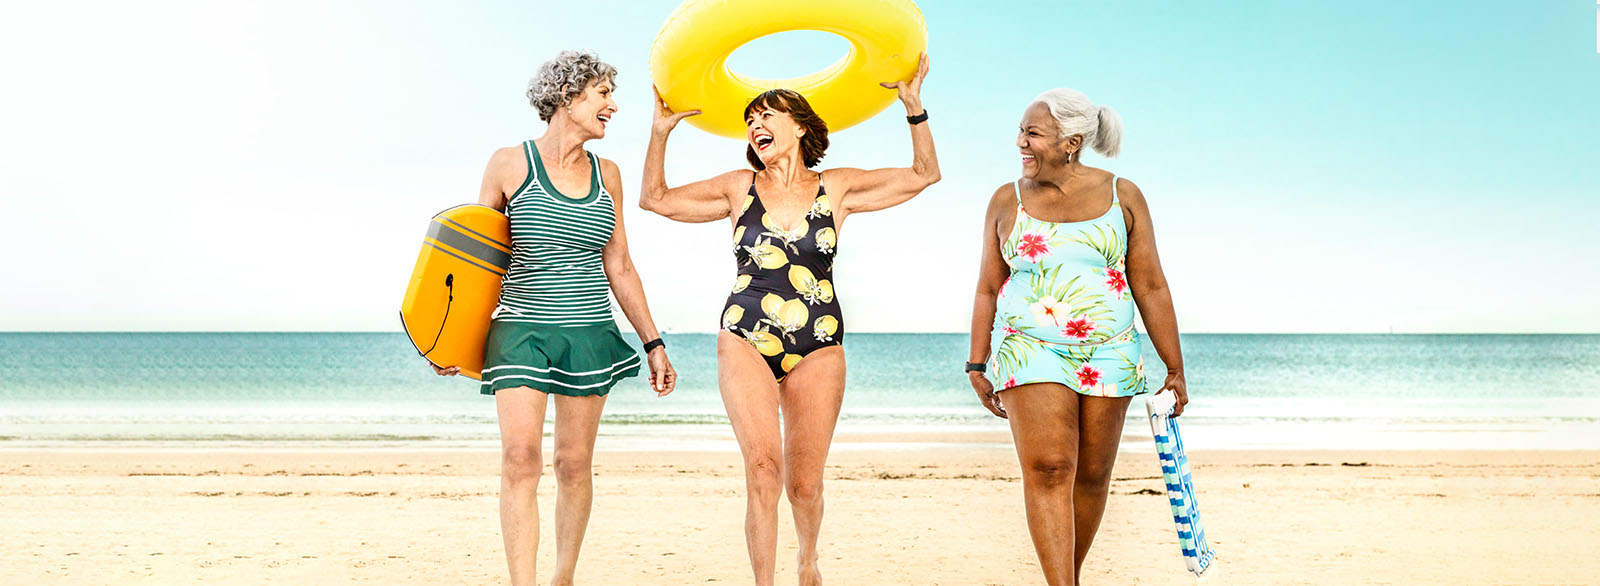 Three women walking together on a beach laughing.